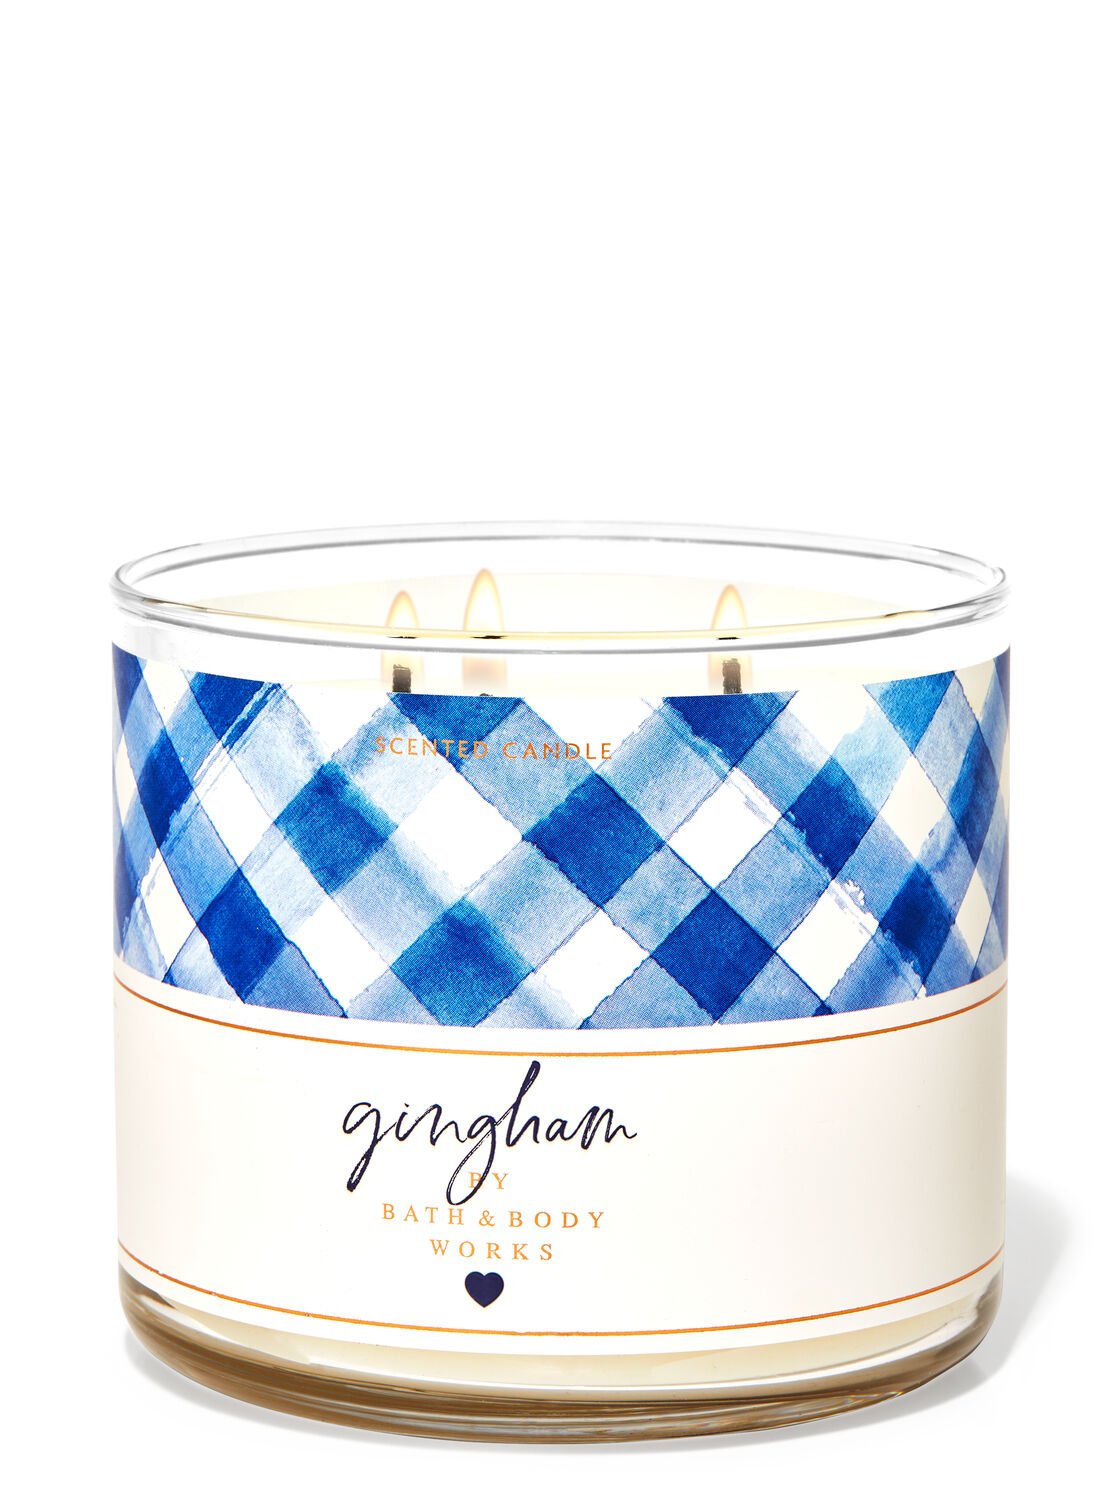 Gingham 3-Wick Candle | Bath & Body Works